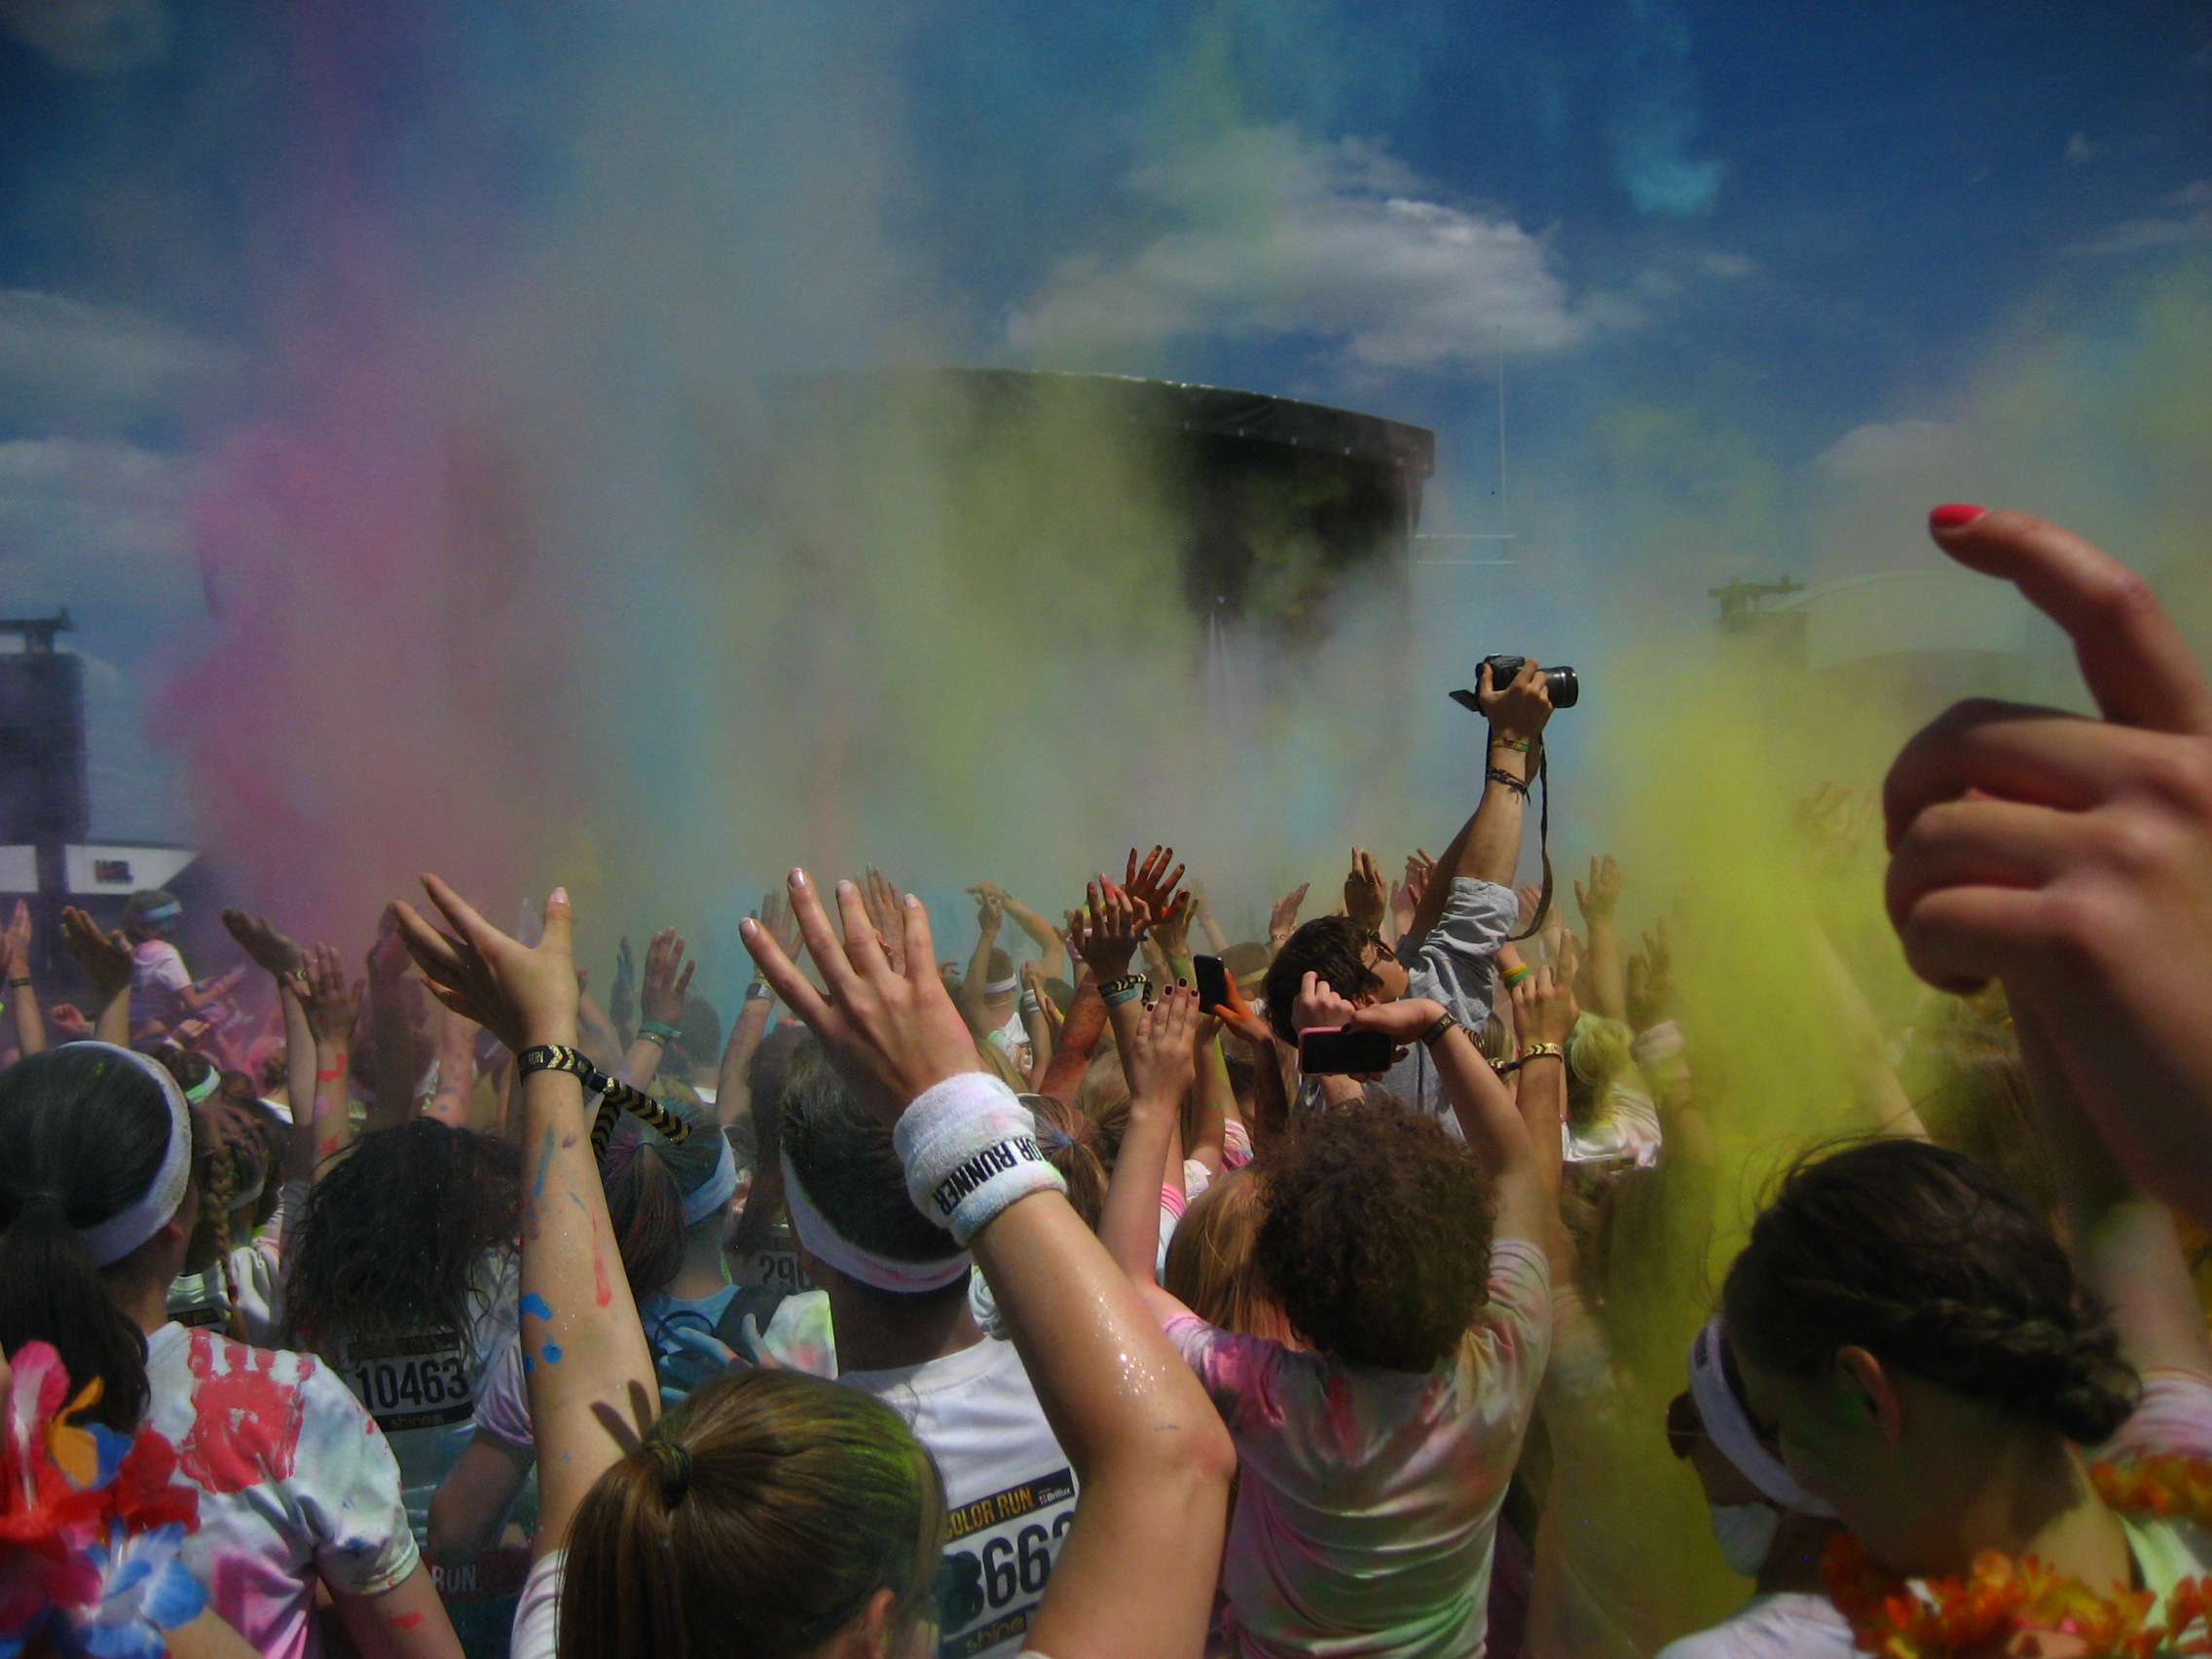 Live life in colors!